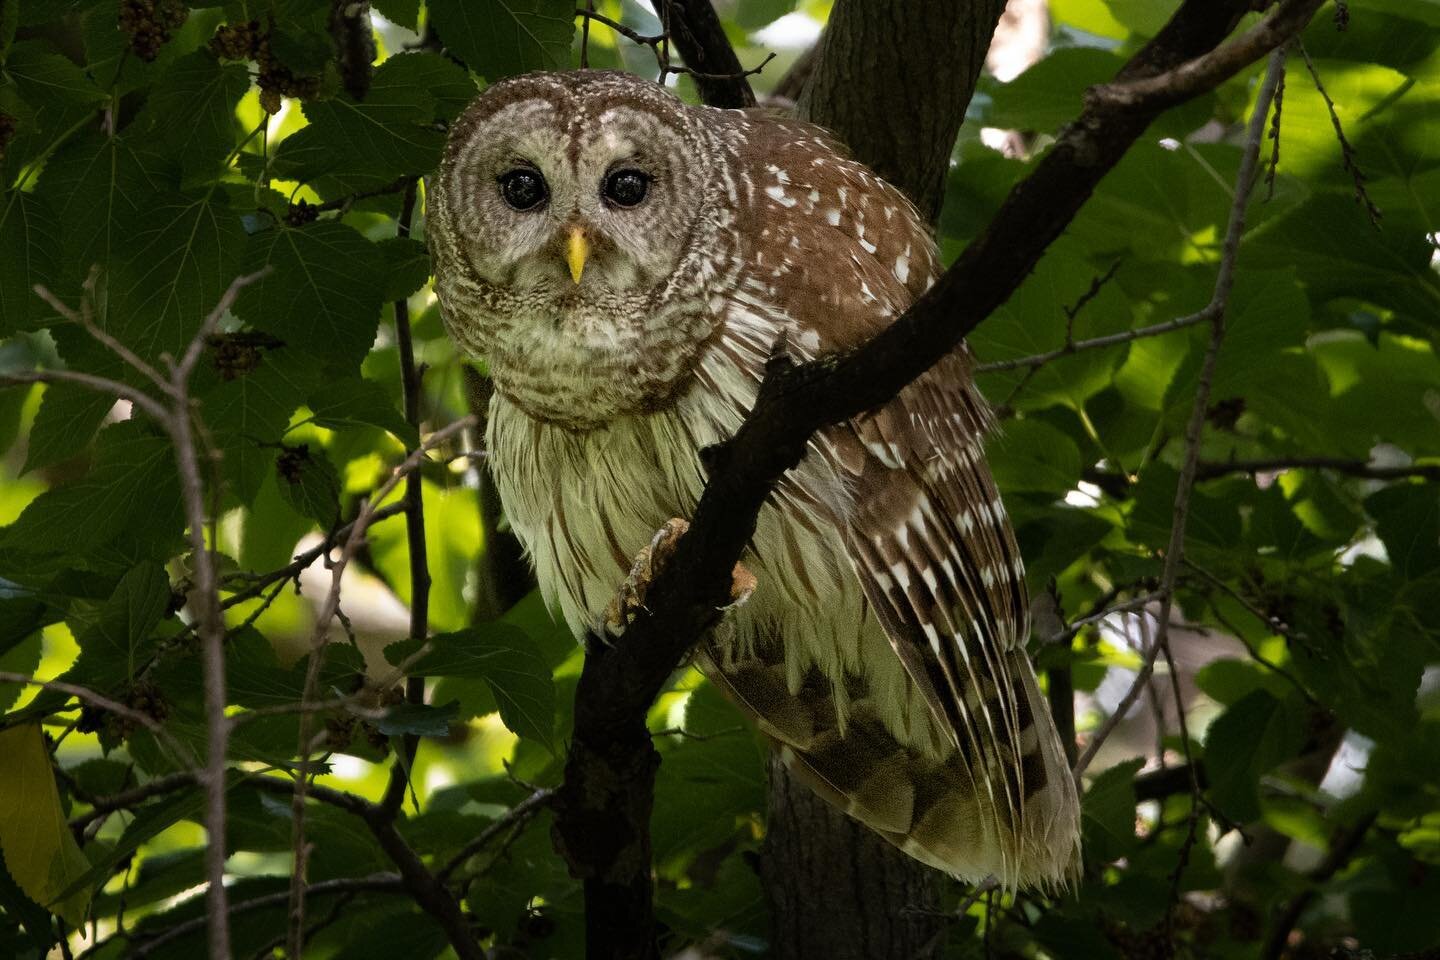 SWIPE 👉🏼 for the full shot 

Elliot the barred owl returns. A shot from this summer near the South Canadian river in Oklahoma. Hopeful I will get a chance to see her again soon!

#bestbirdshots #conservationphotography #climatechange #barredowl #wi